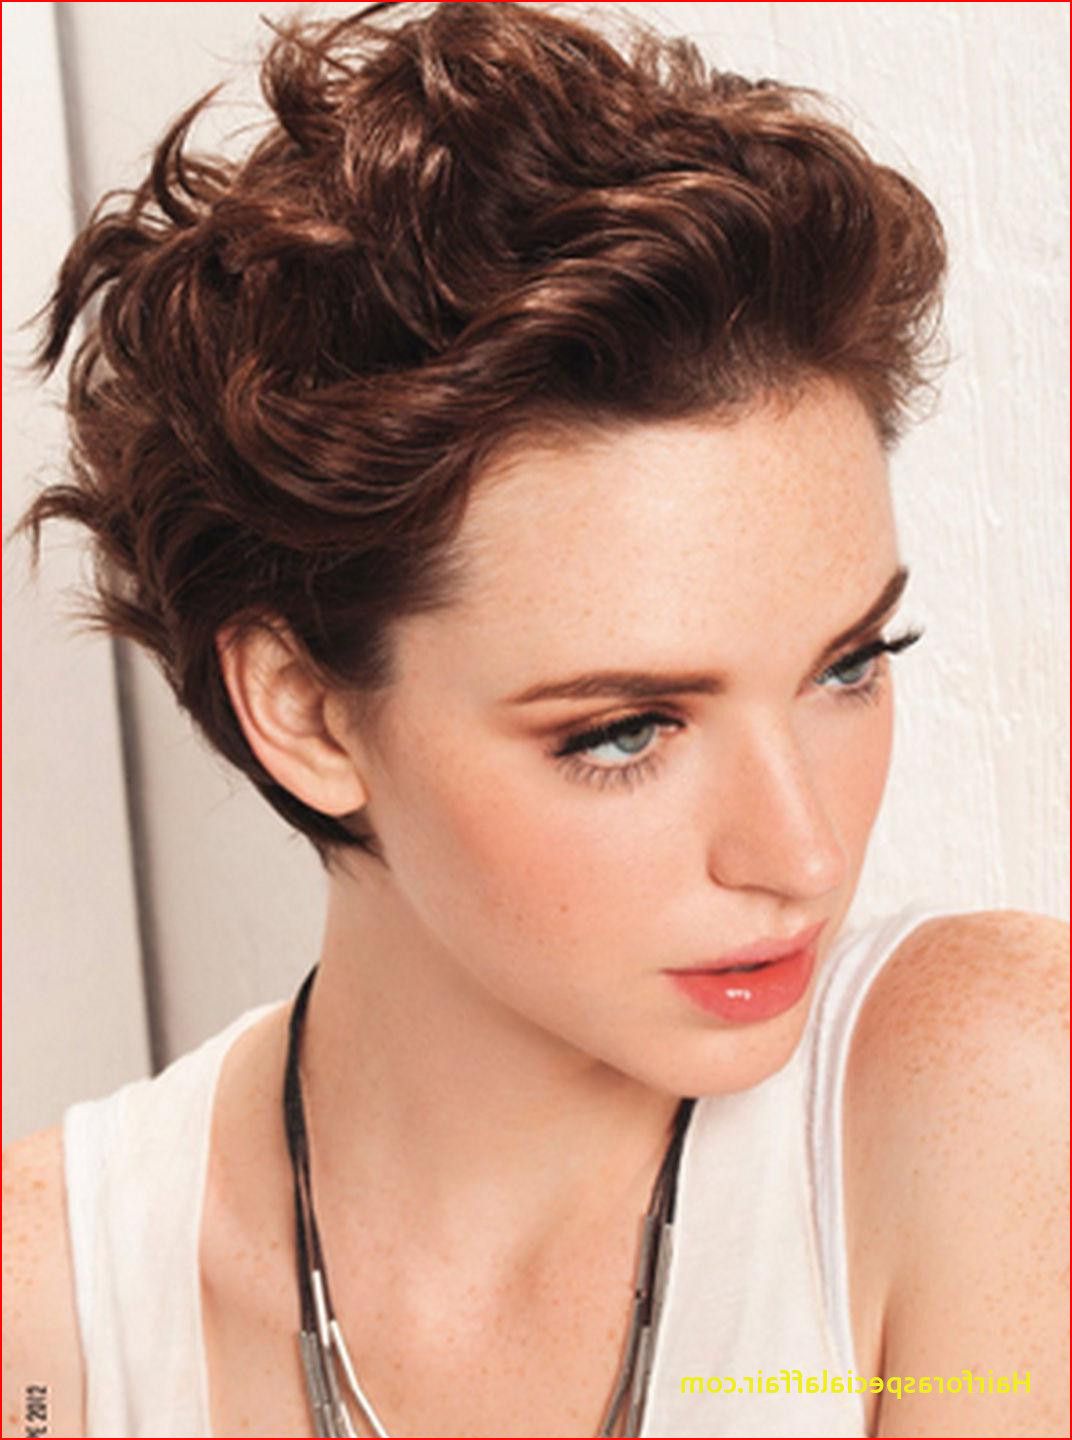 Short Haircuts For Women With Thick Wavy Hair Cute Short Haircuts Within Short Hairstyles For Thick Wavy Hair (View 7 of 25)